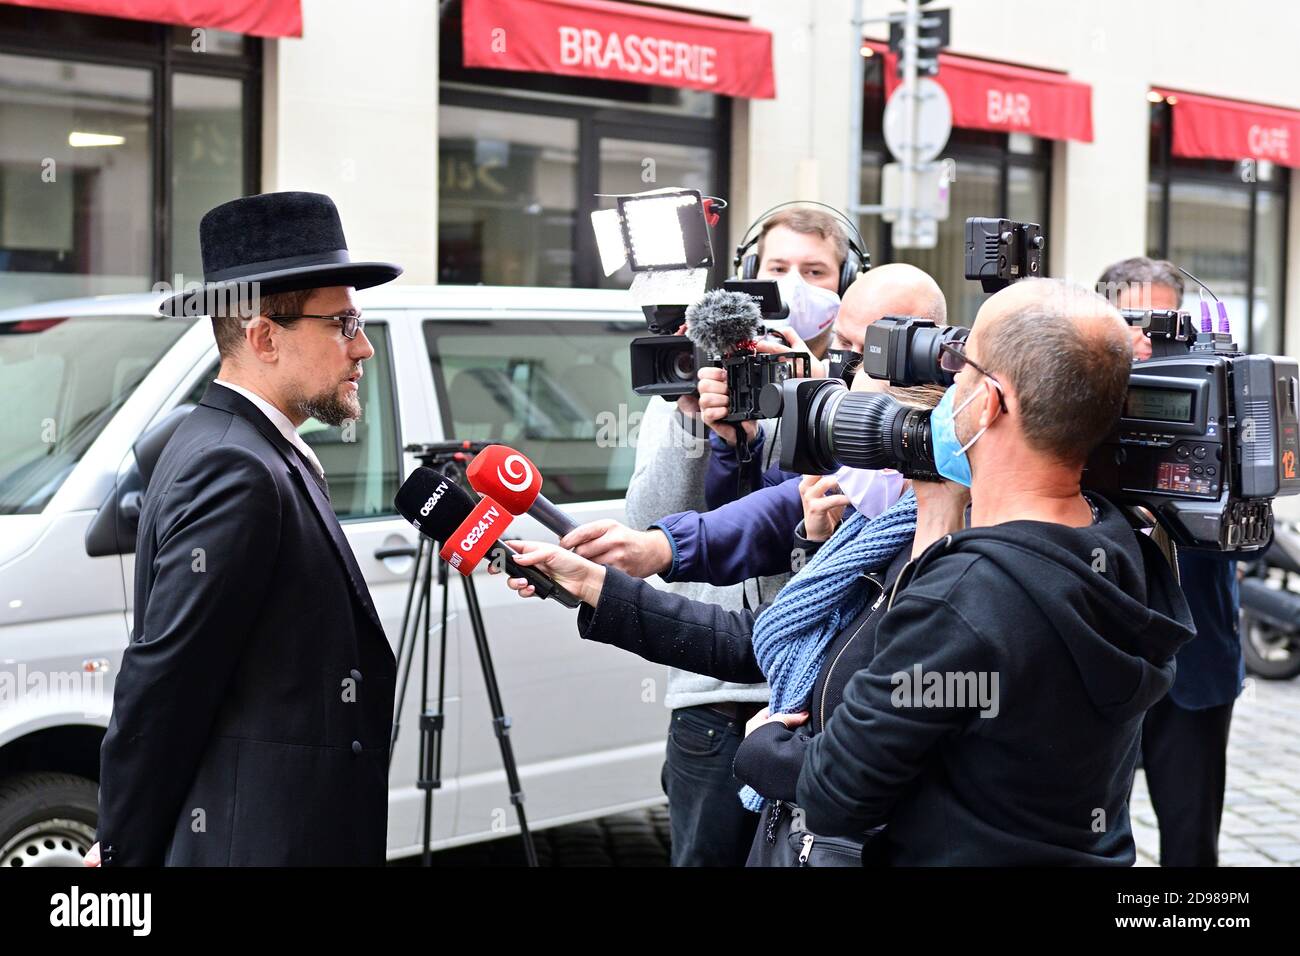 Vienna, Austria. 03rd Nov, 2020. Terrorist attack in Vienna on October 2nd, 2020. The first district of Vienna is still cordoned off. So far there have been 4 dead and 15, some seriously injured. Image shows Rabbi Schlomo Hofmeister. Stock Photo